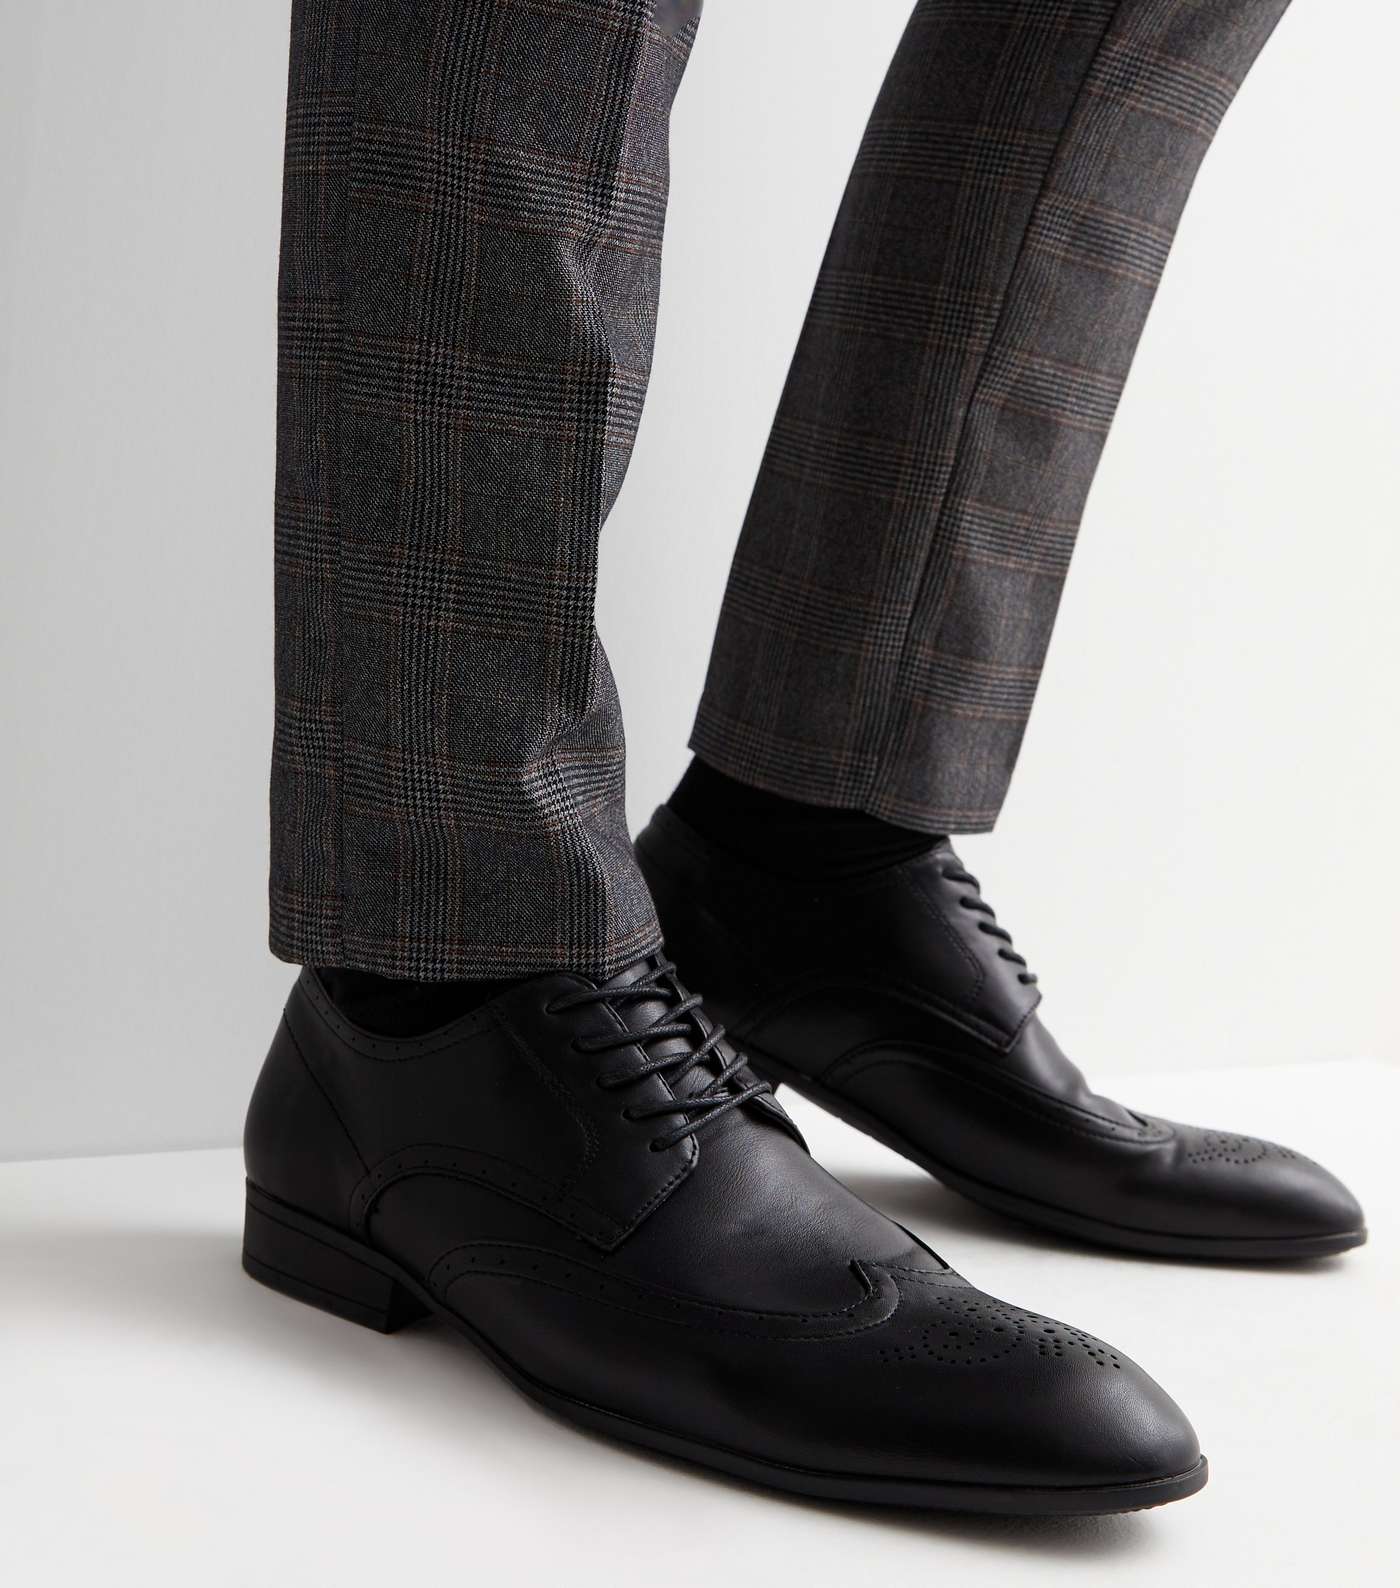 Black Leather-Look Lace Up Brogues Image 2